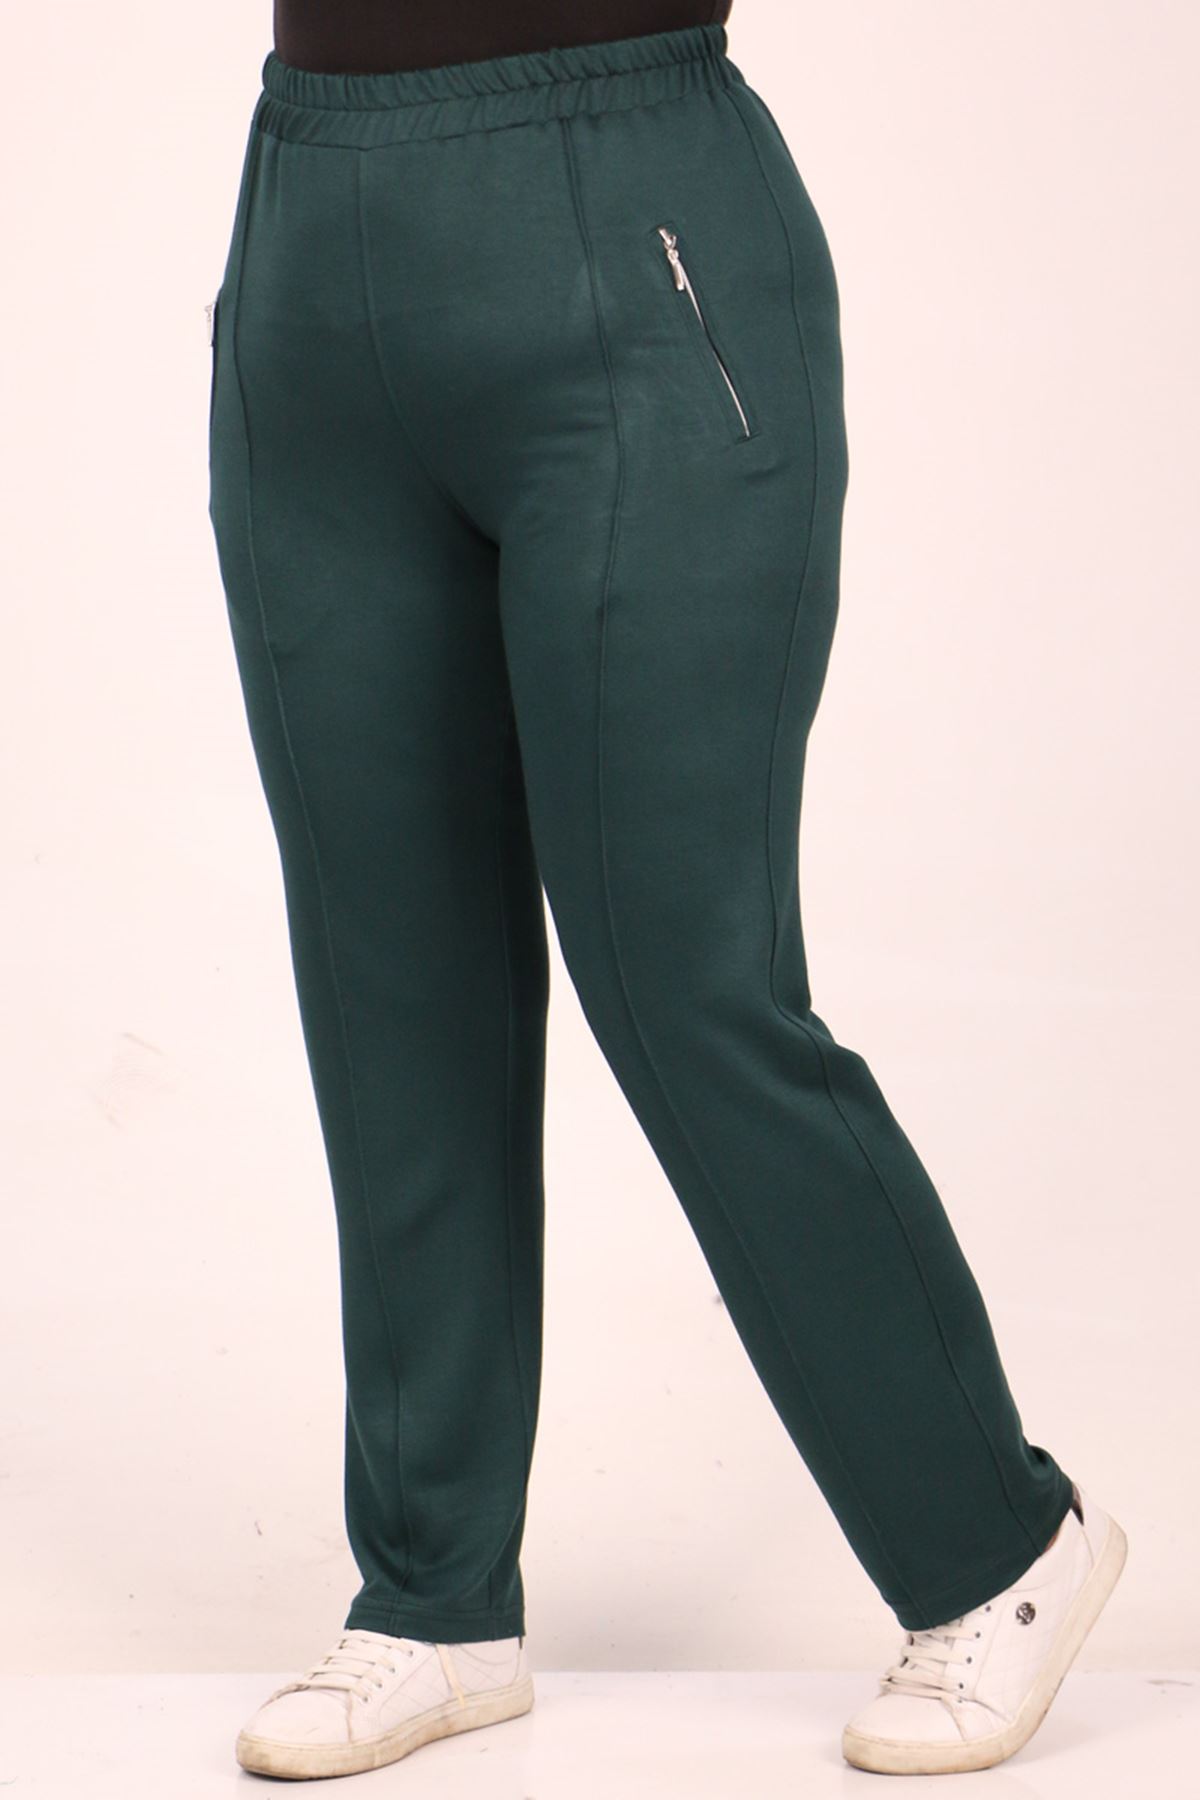 39504 Plus Size Crystal Two Thread Sweatpants-Emerald